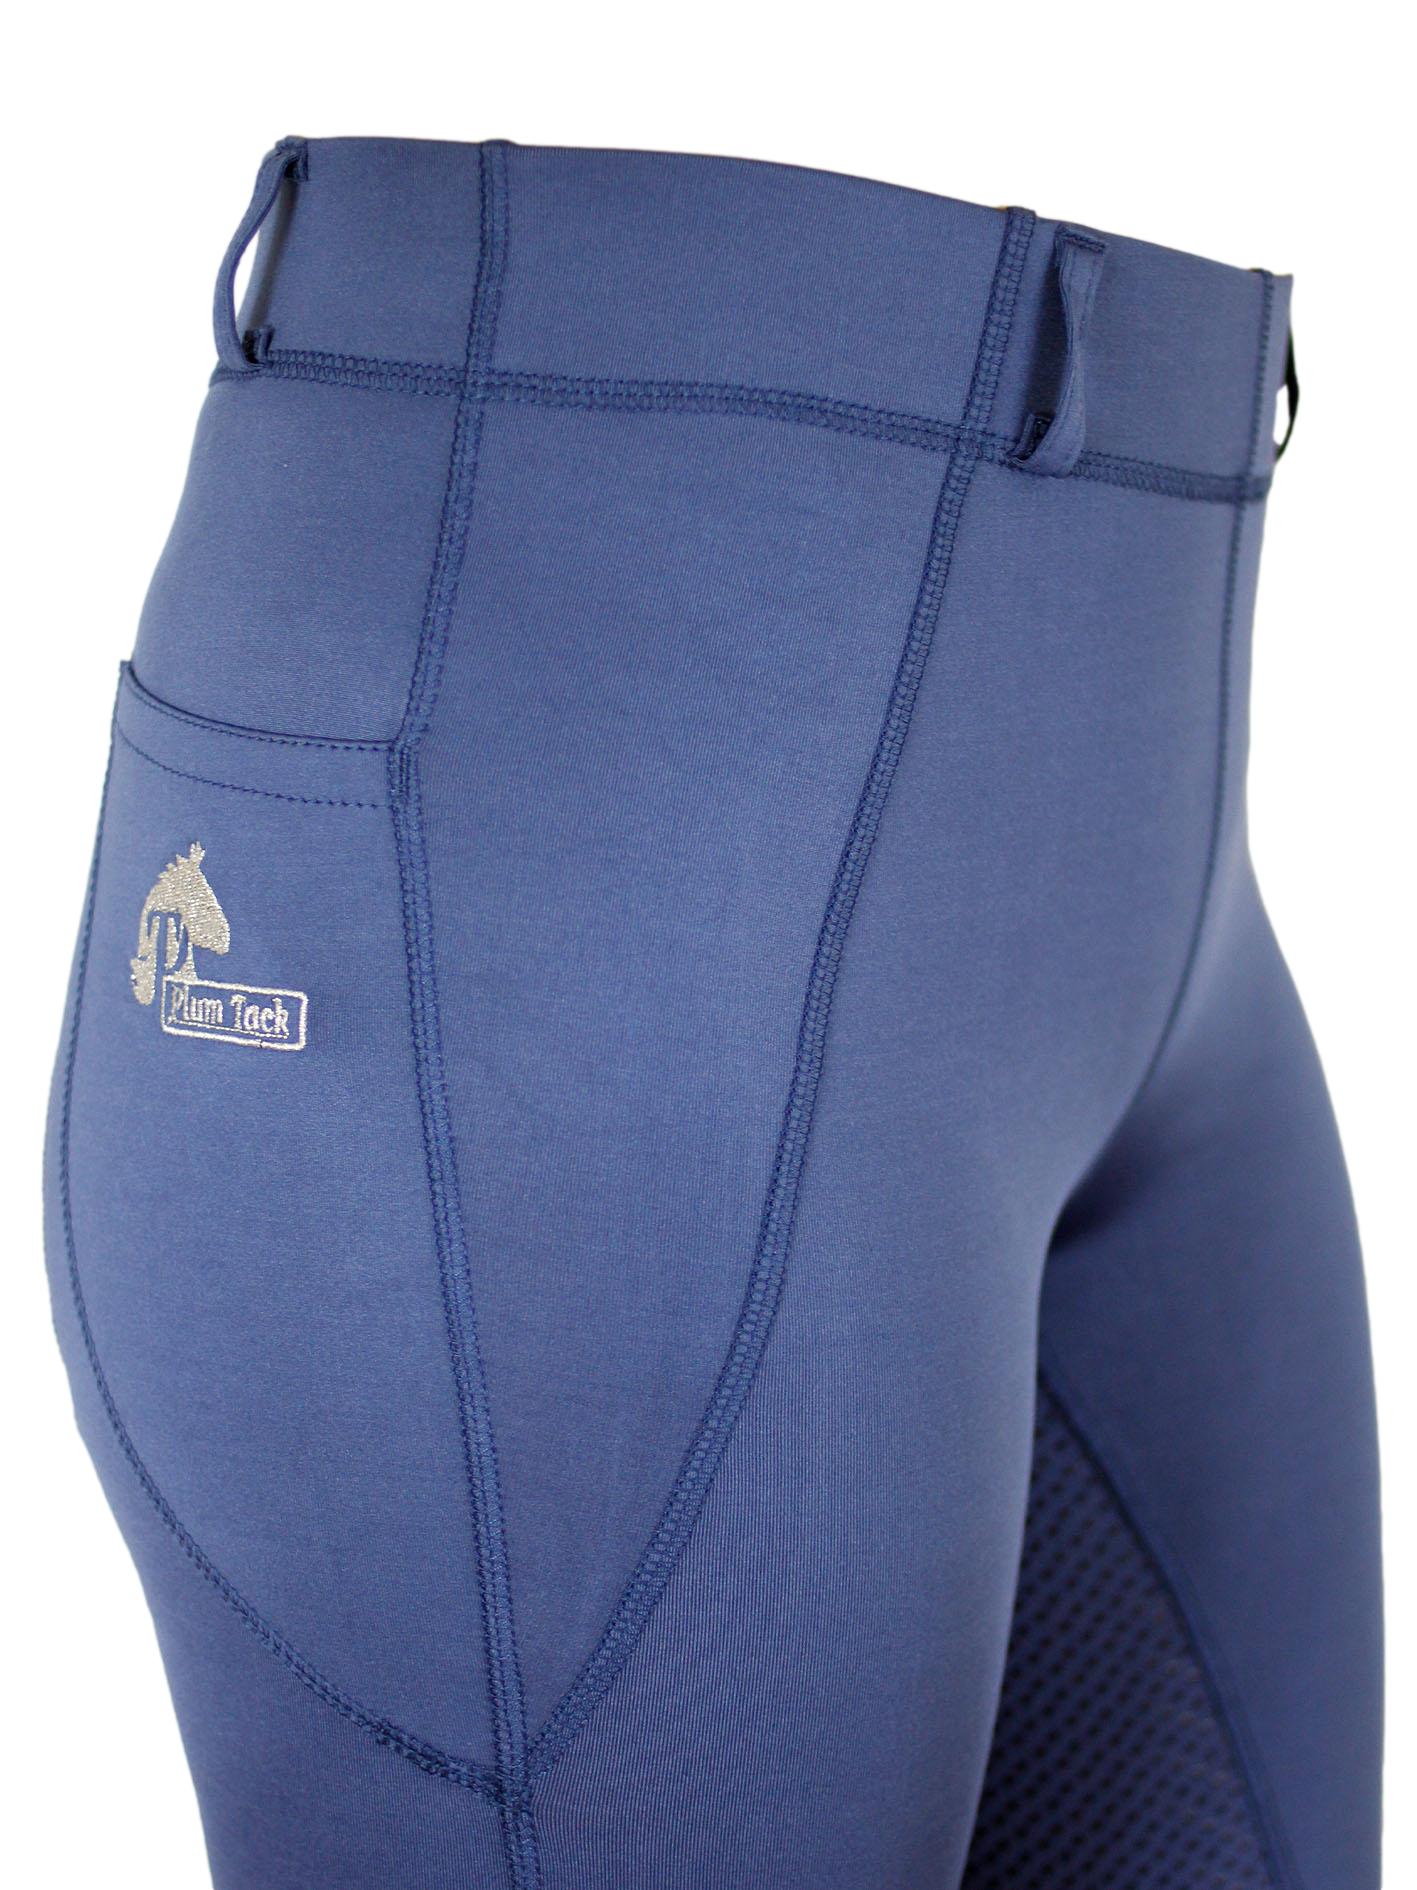 Navy blue Horse Riding Tights with logo and mesh detail.